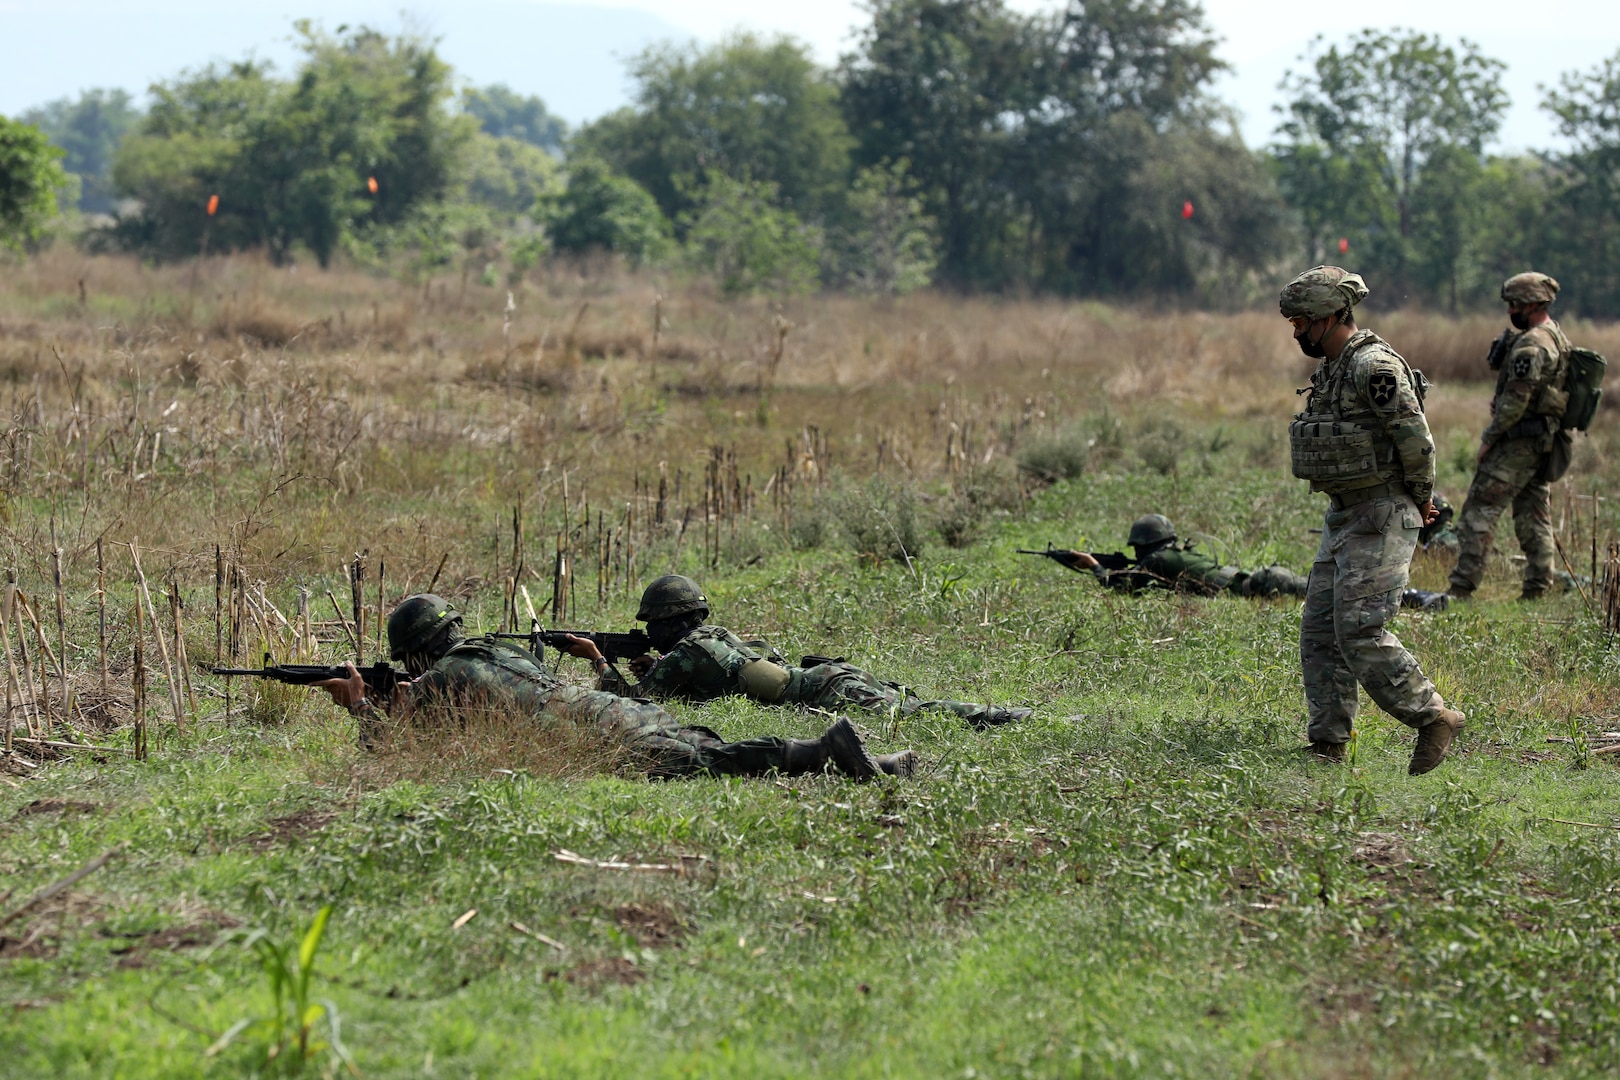 U.S. Army infantrymen with the 4th Battalion, 23rd Infantry Regiment, 2nd Stryker Brigade Combat Team, 7th Infantry Division, instructs a team of soldiers from the 112th Infantry Regiment, Royal Thai Army, during a dismount training exercise during Cobra Gold 2022 in the Lopburi Province of the Kingdom of Thailand, Feb. 26, 2022.